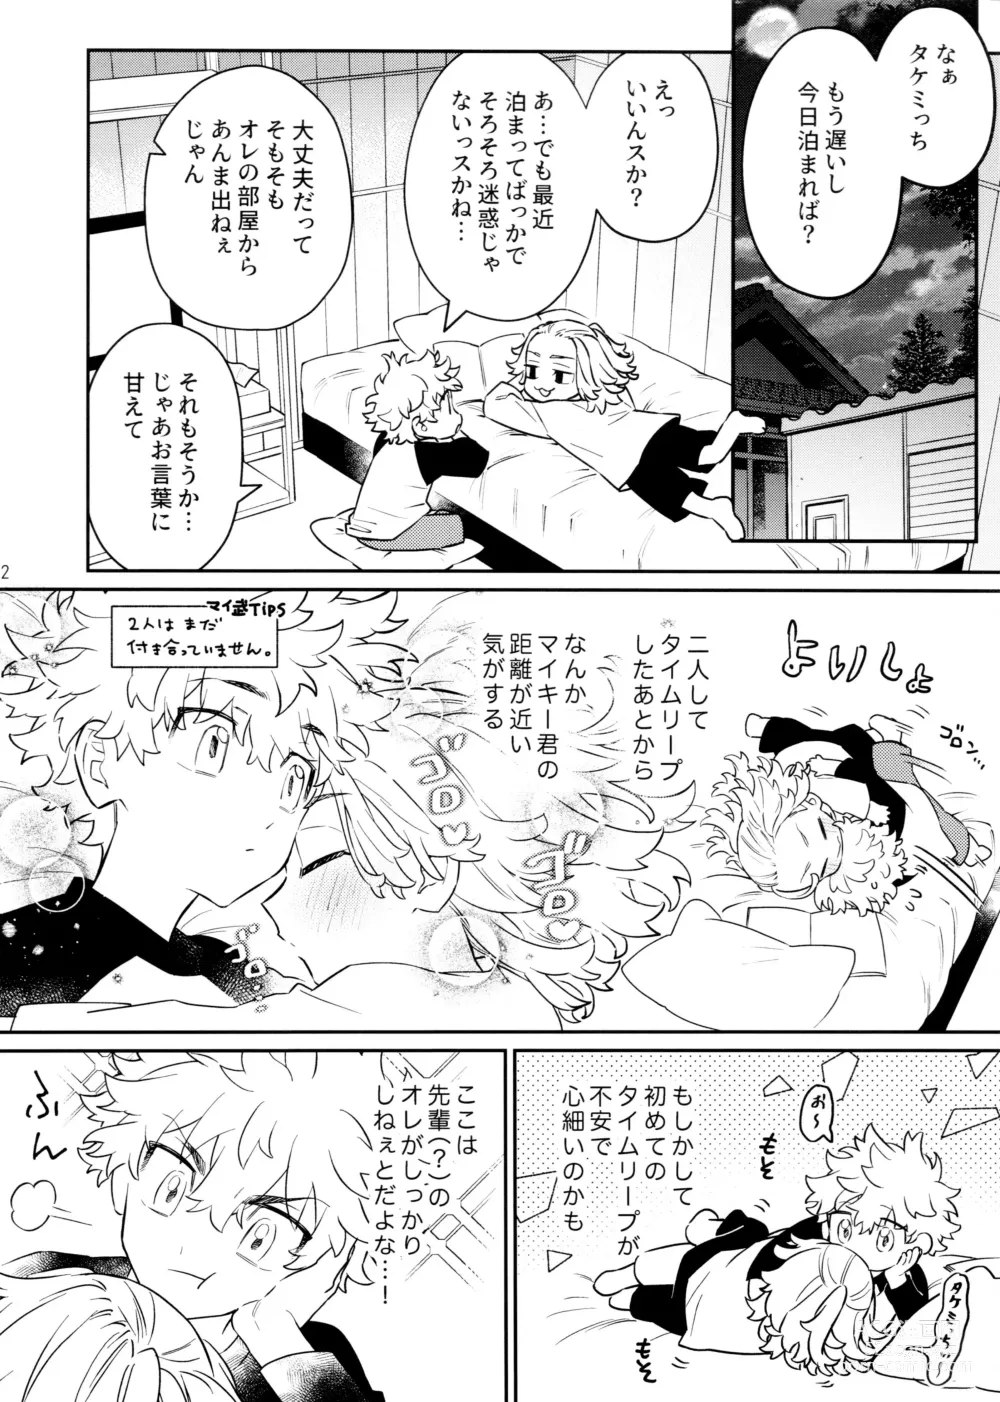 Page 2 of doujinshi HELLION